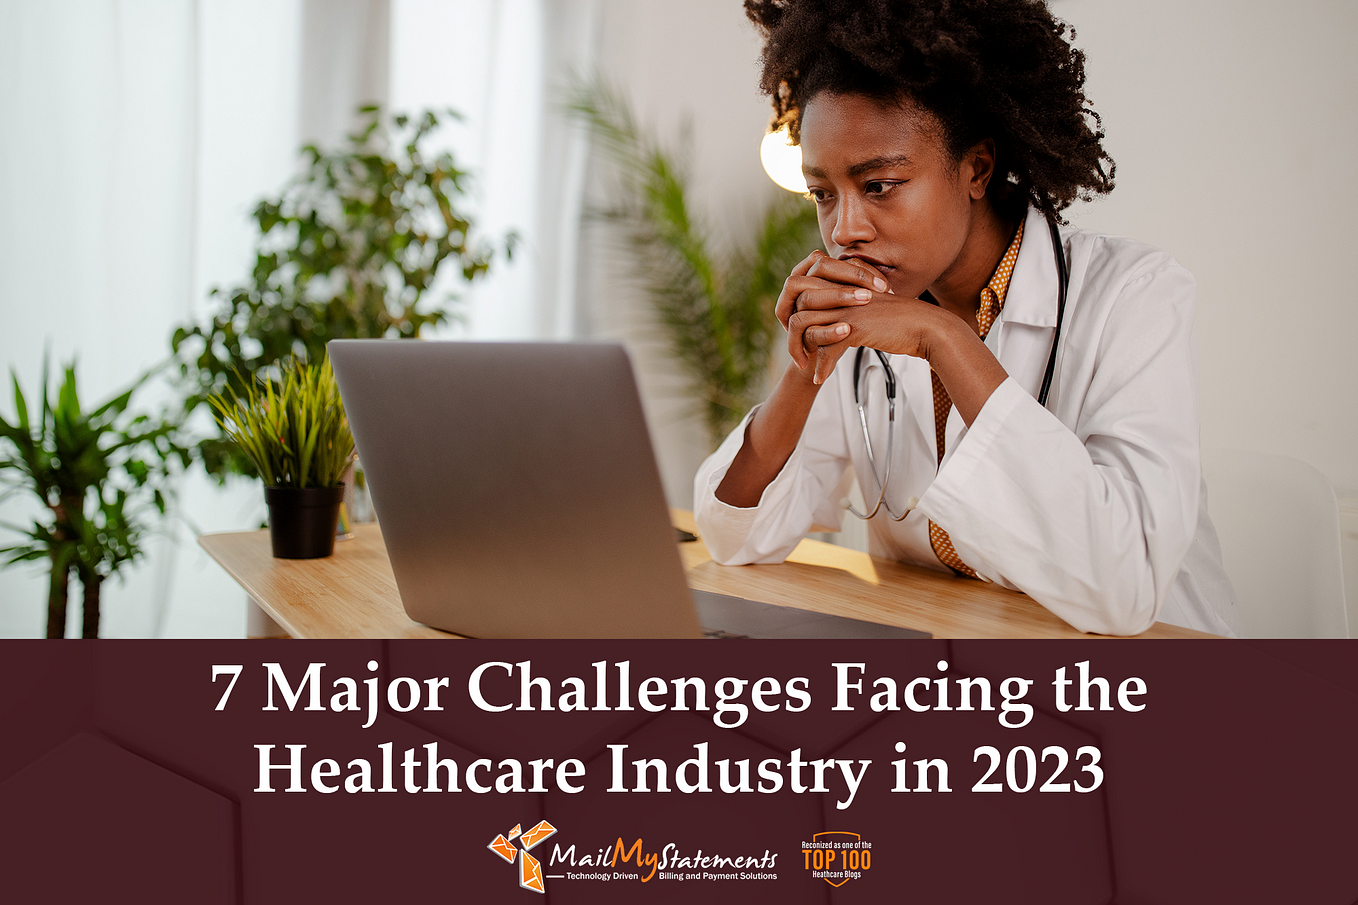 7 Major Challenges Facing the Healthcare Industry in 2023